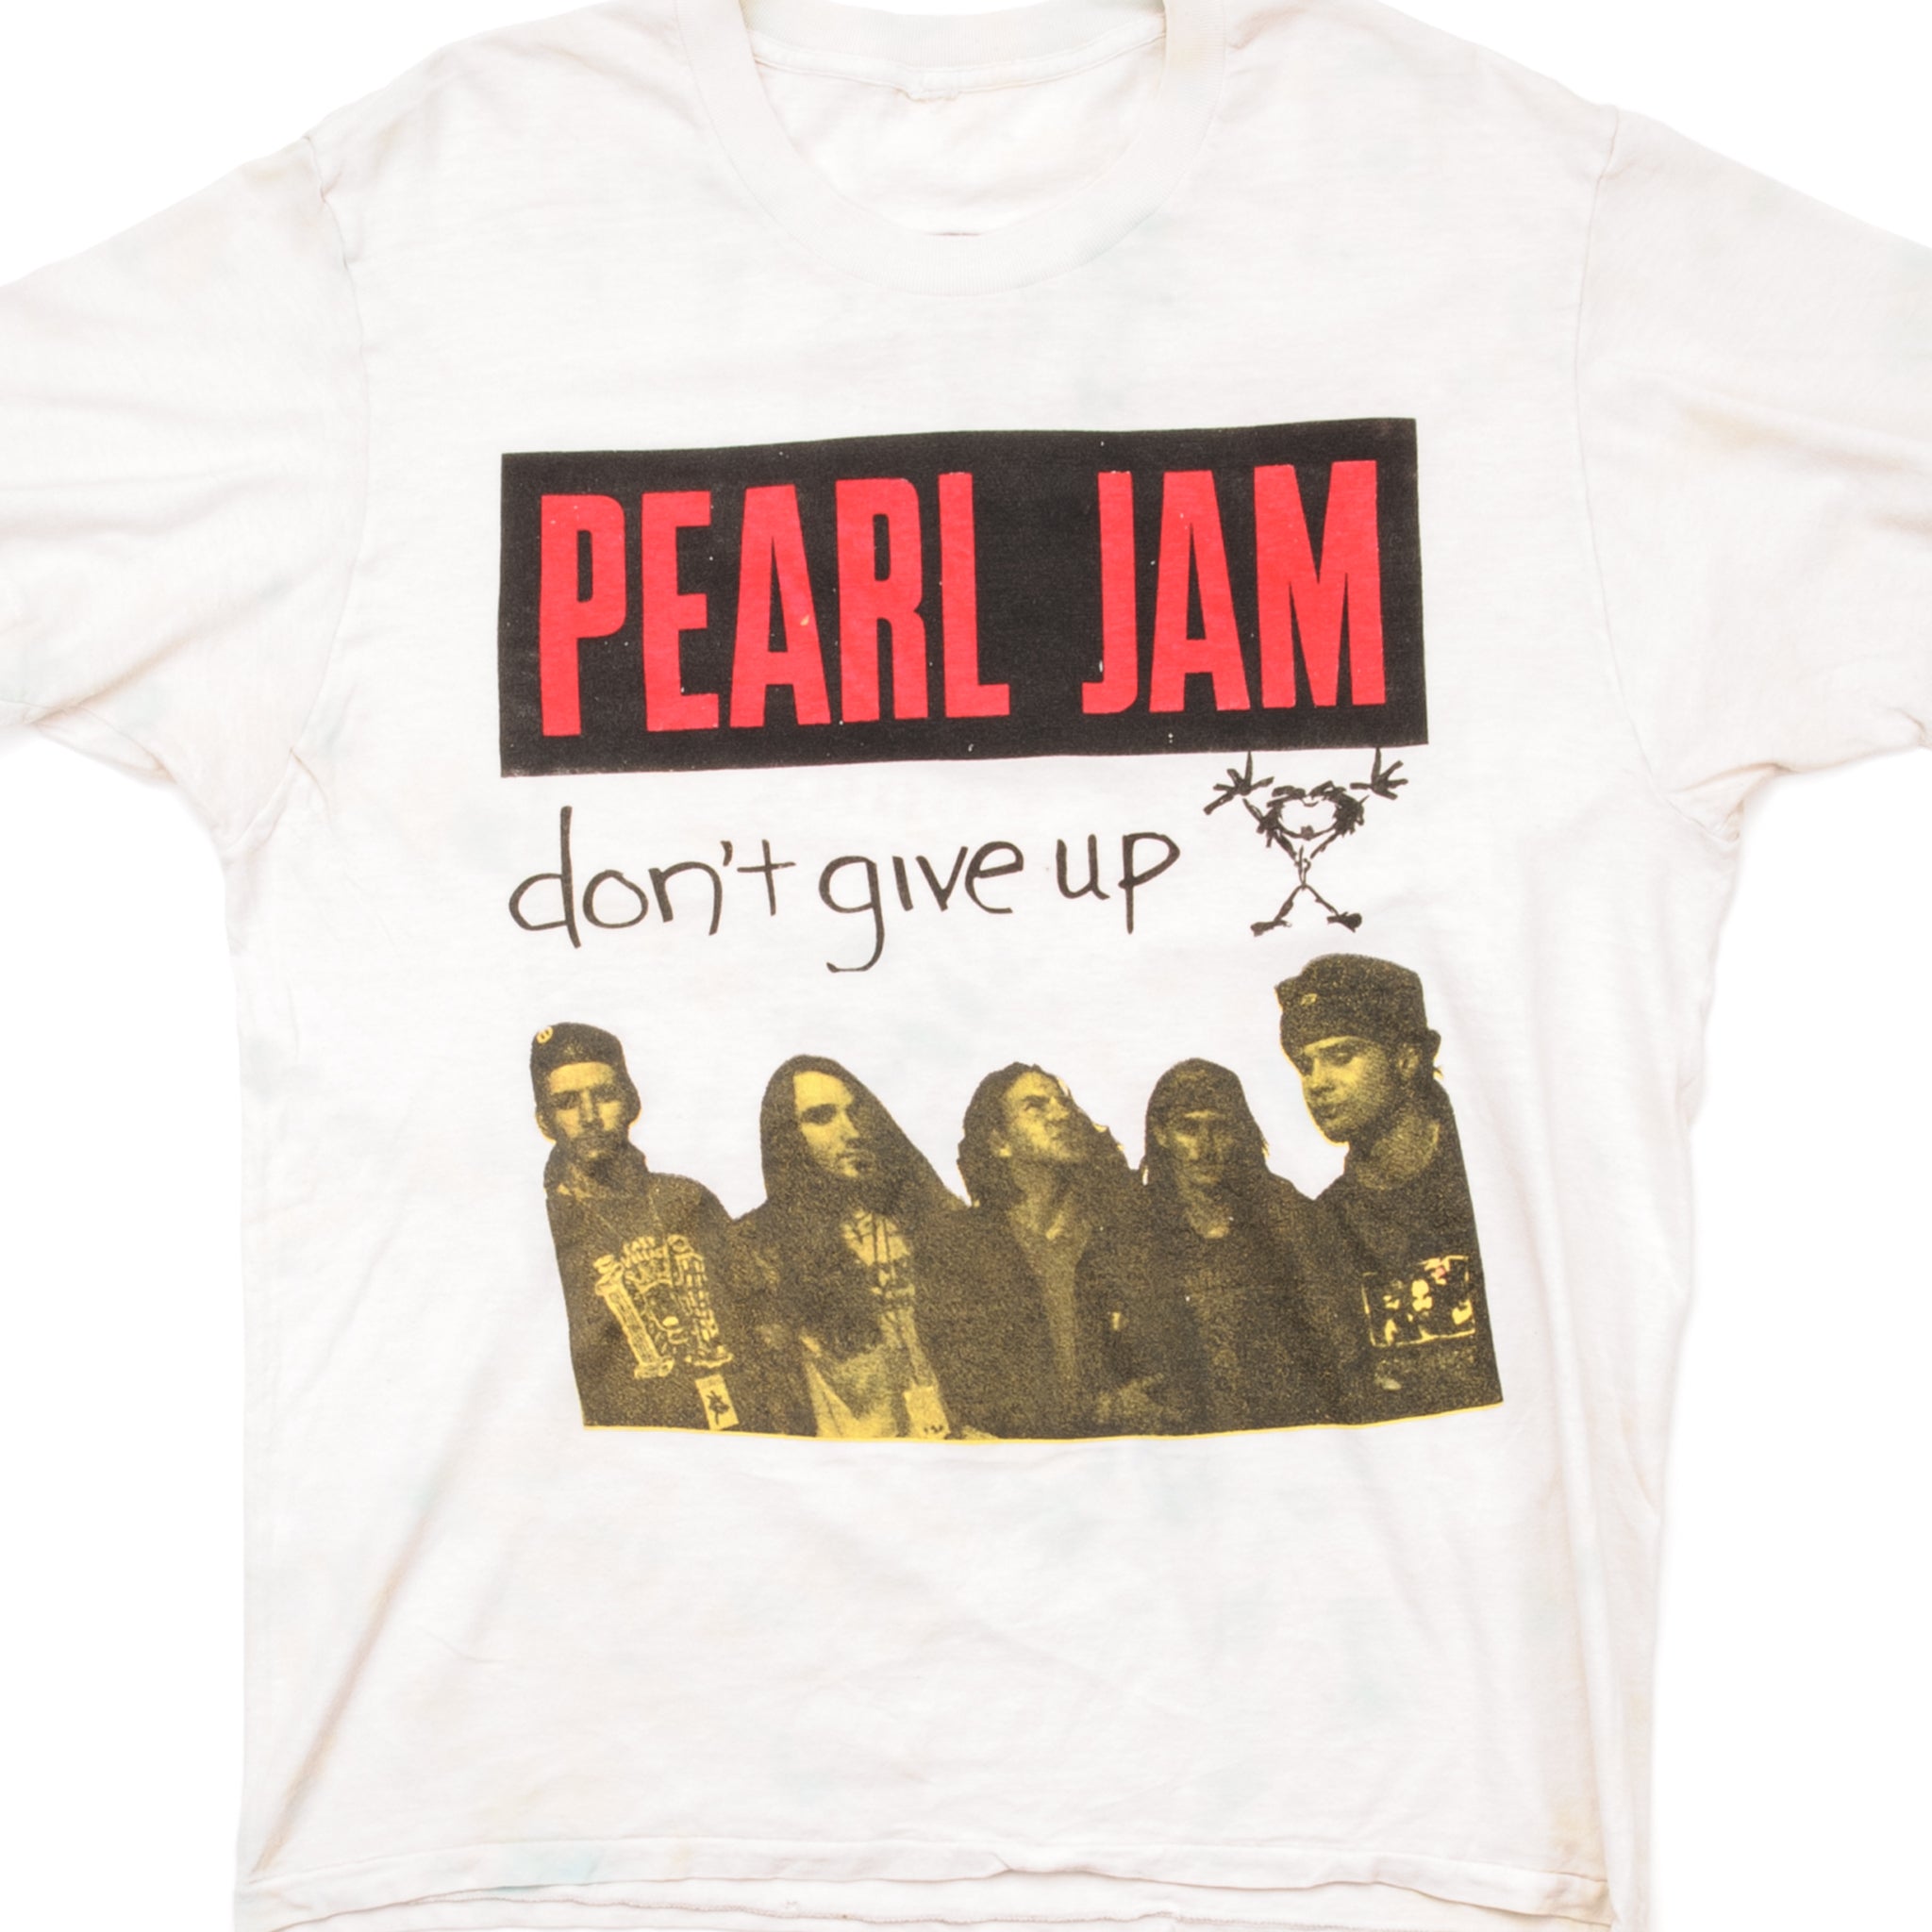 90's PEARL JAM DON'T GIVE UP Tシャツ | cair4youth.com